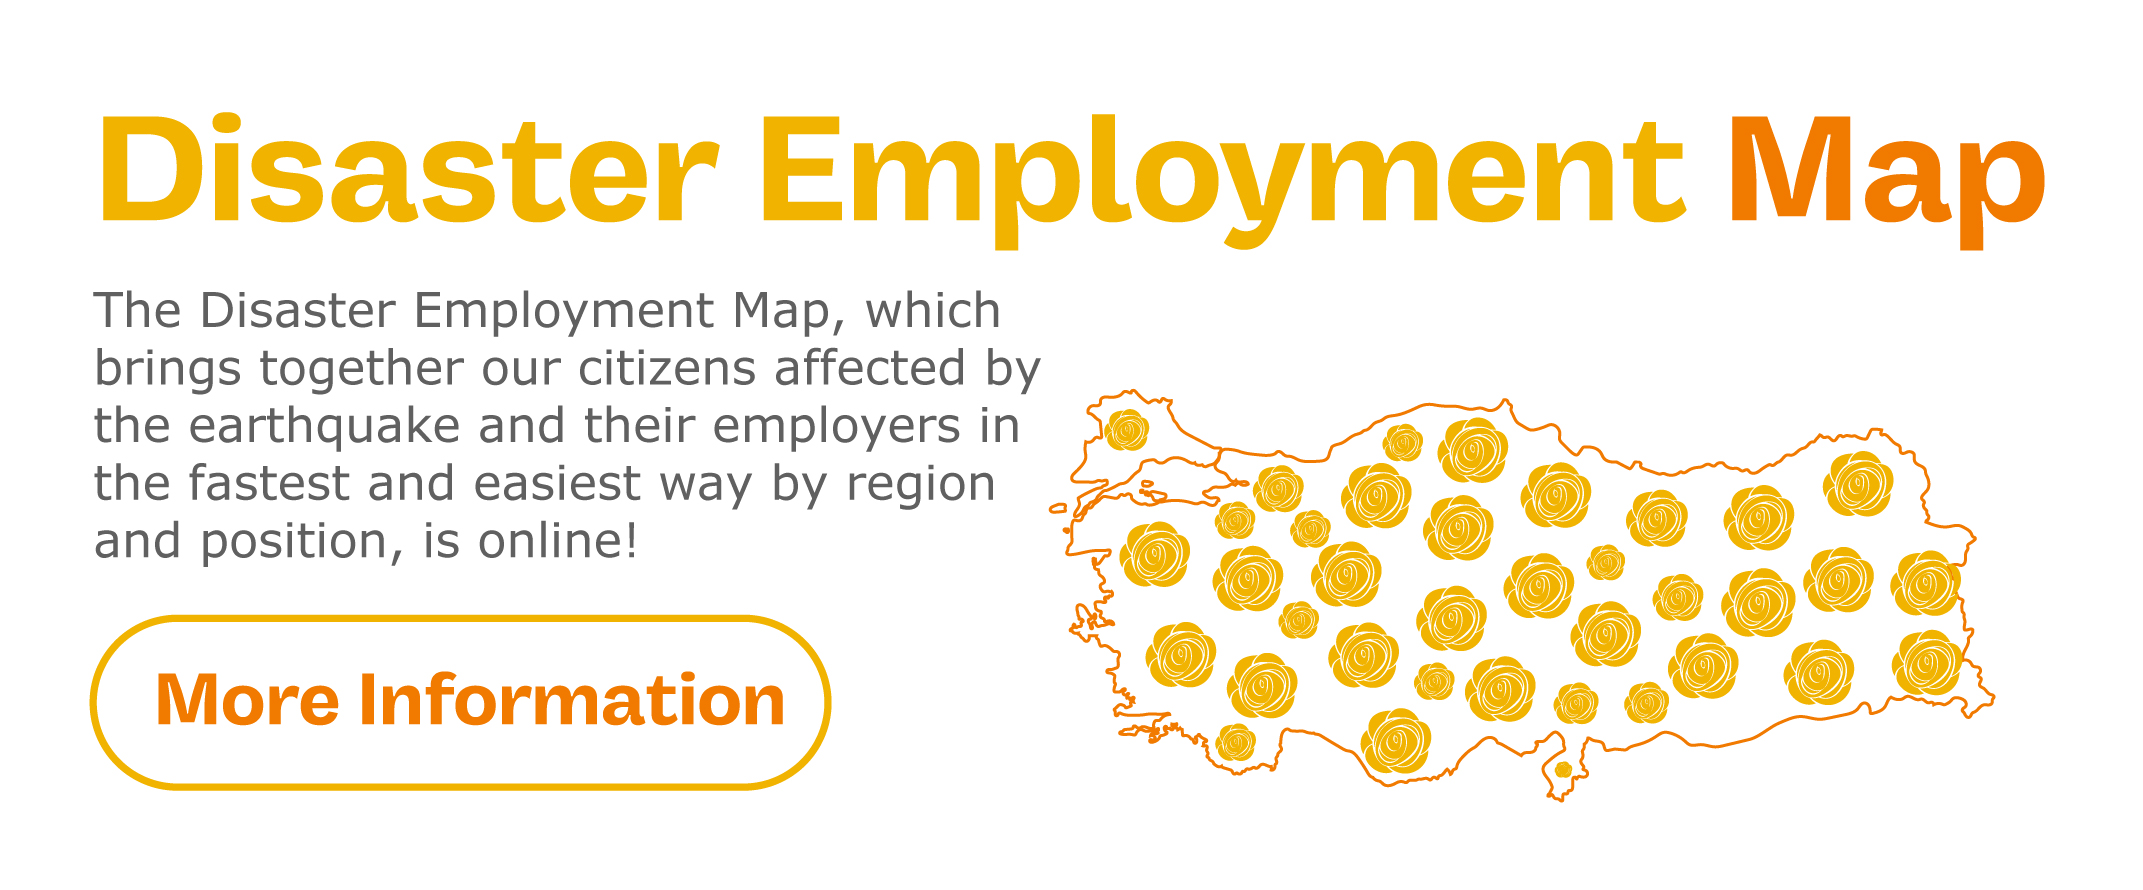 Disaster Employment Map